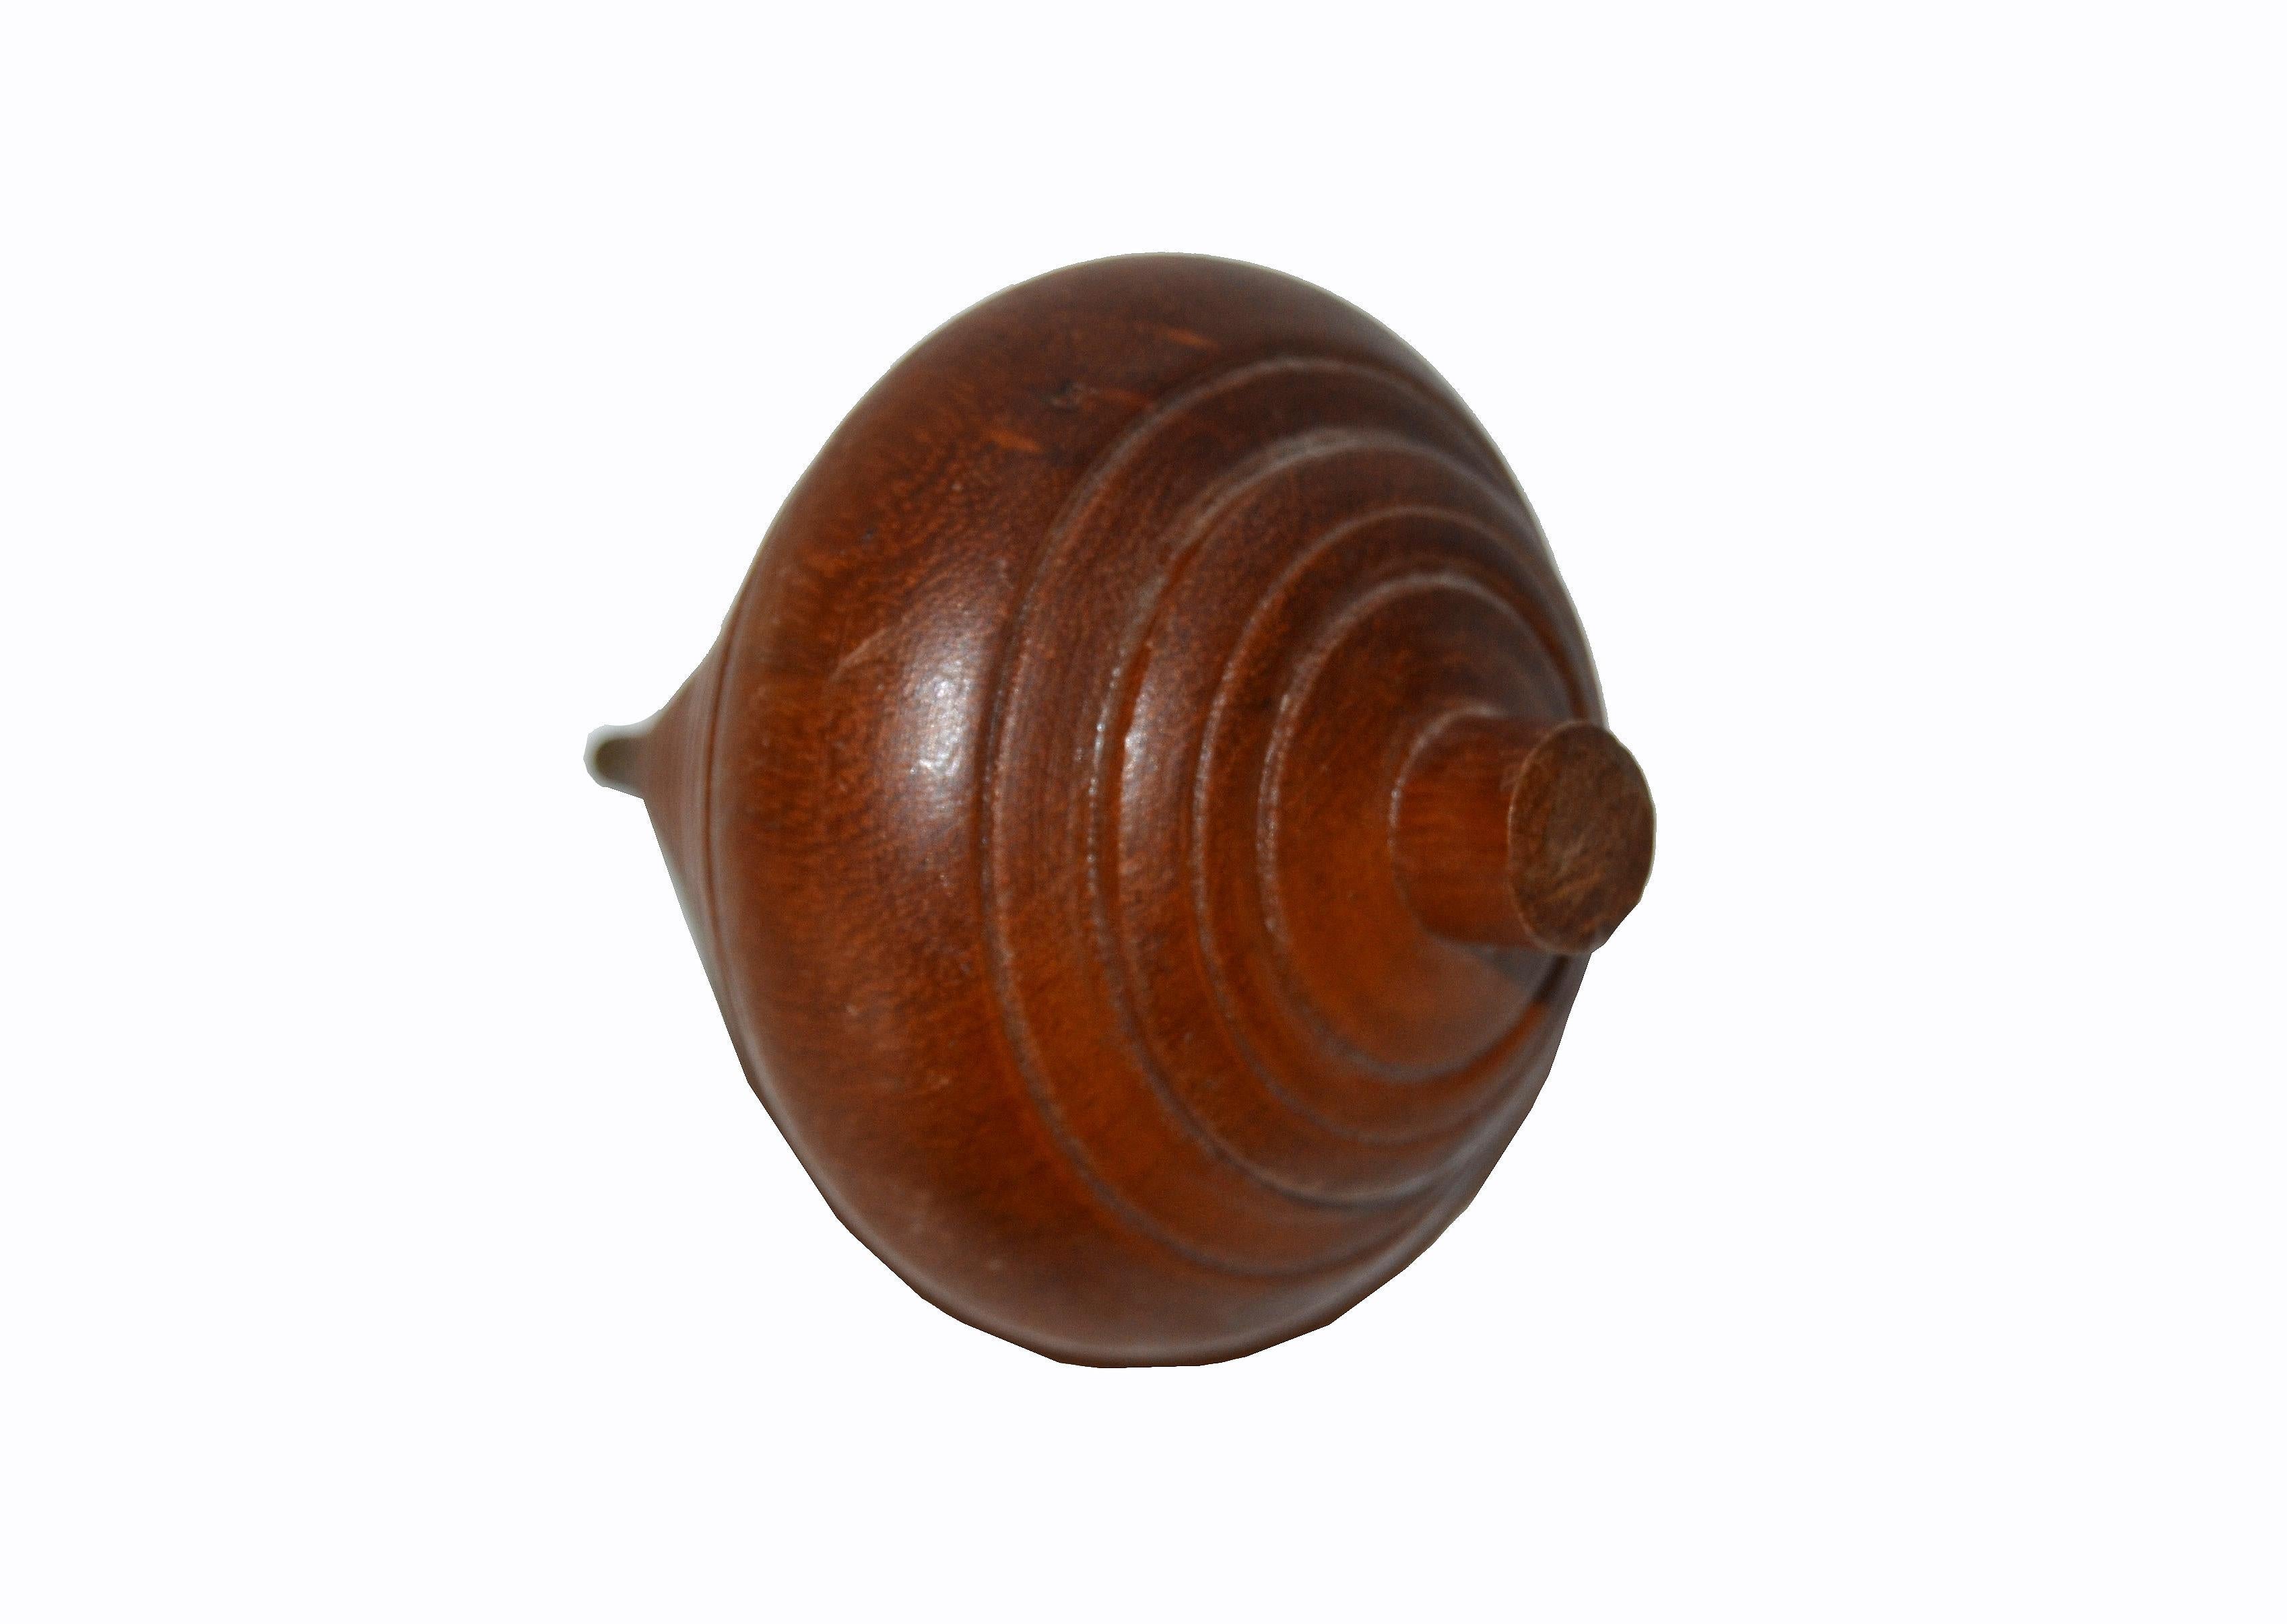 Rustic American Mid-Century Modern Woodworking Turned Walnut Wood Spinning Top Toy For Sale